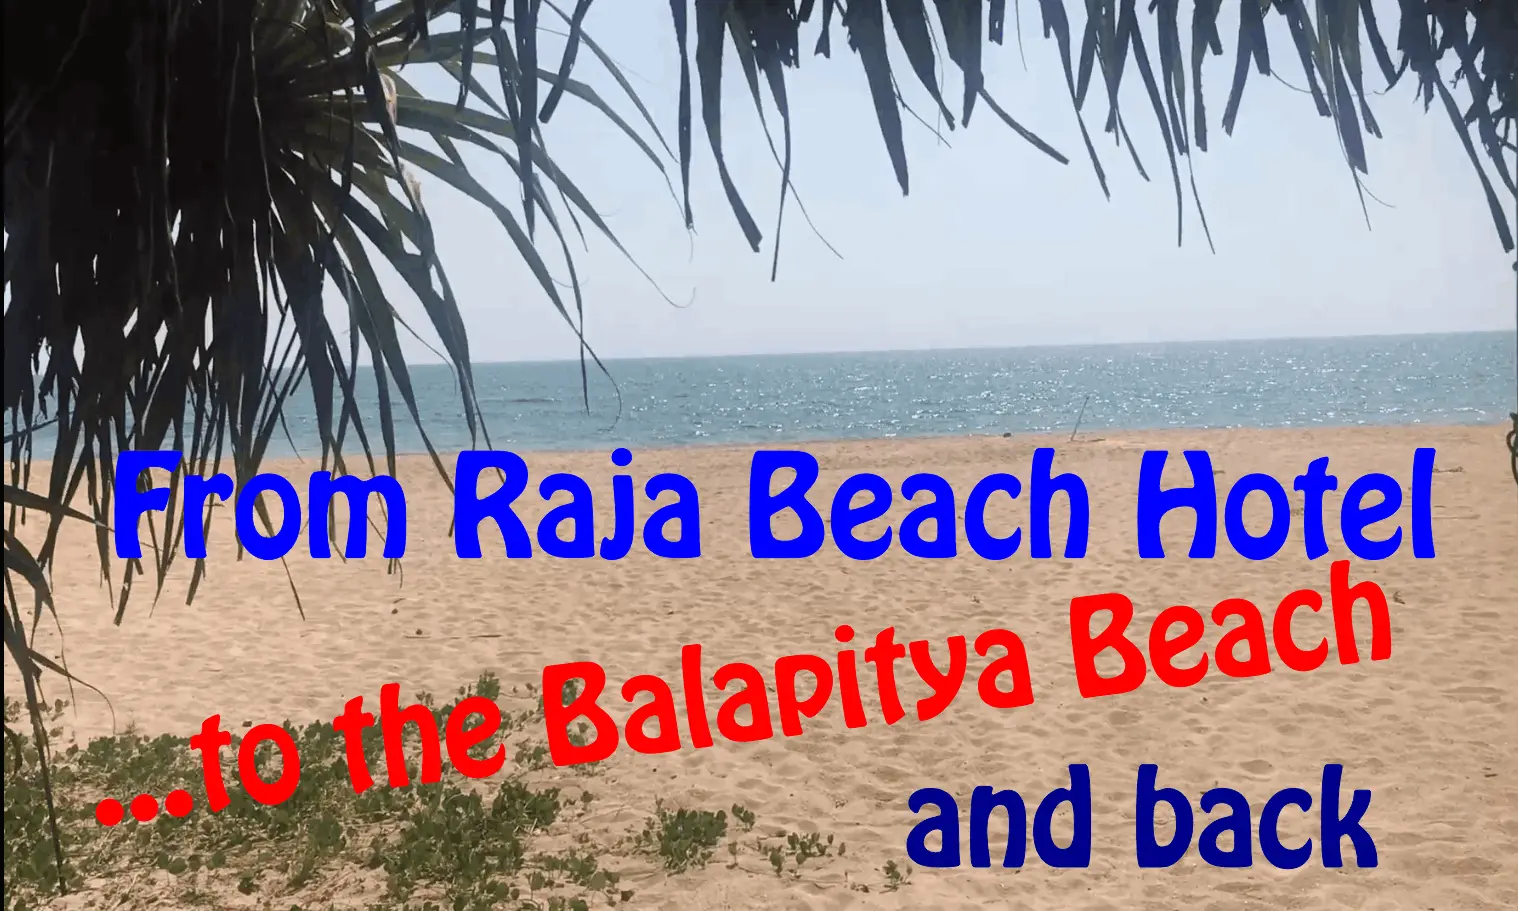 Video showing Access from Raja Beach Hotel to Beach